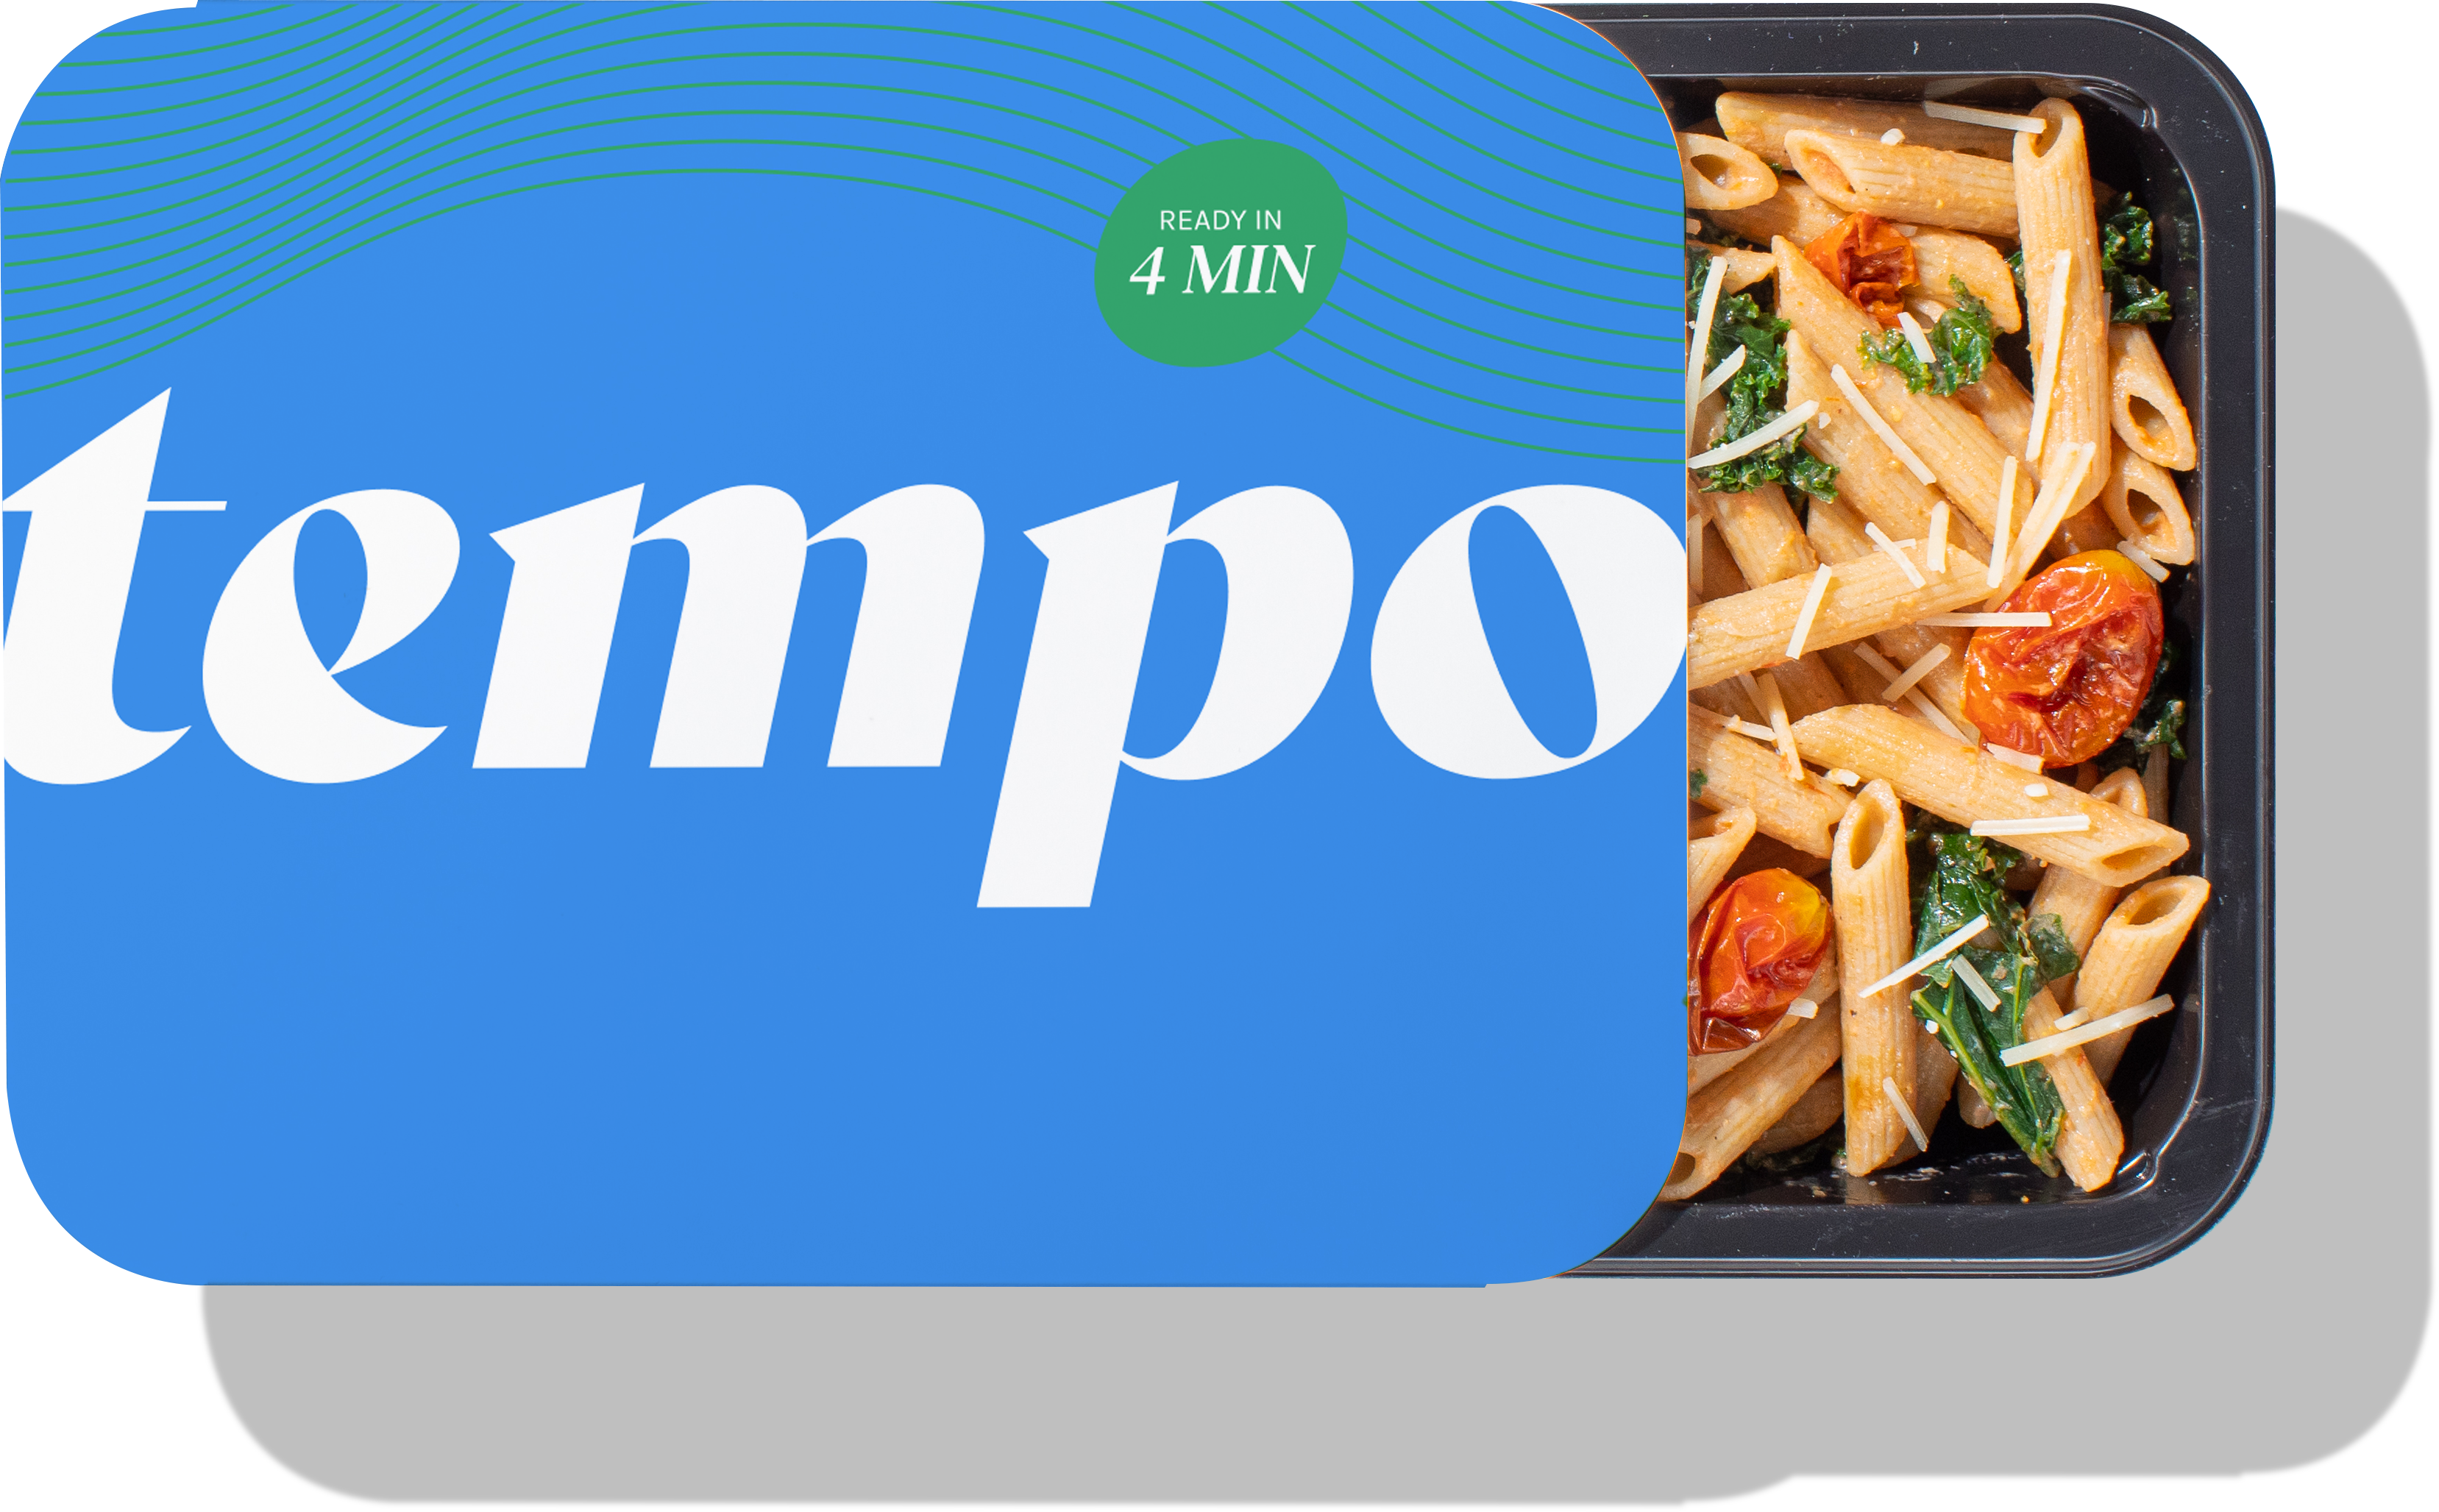 A Tempo Creamy Tomato Penne meal on a white background, branded cover half off